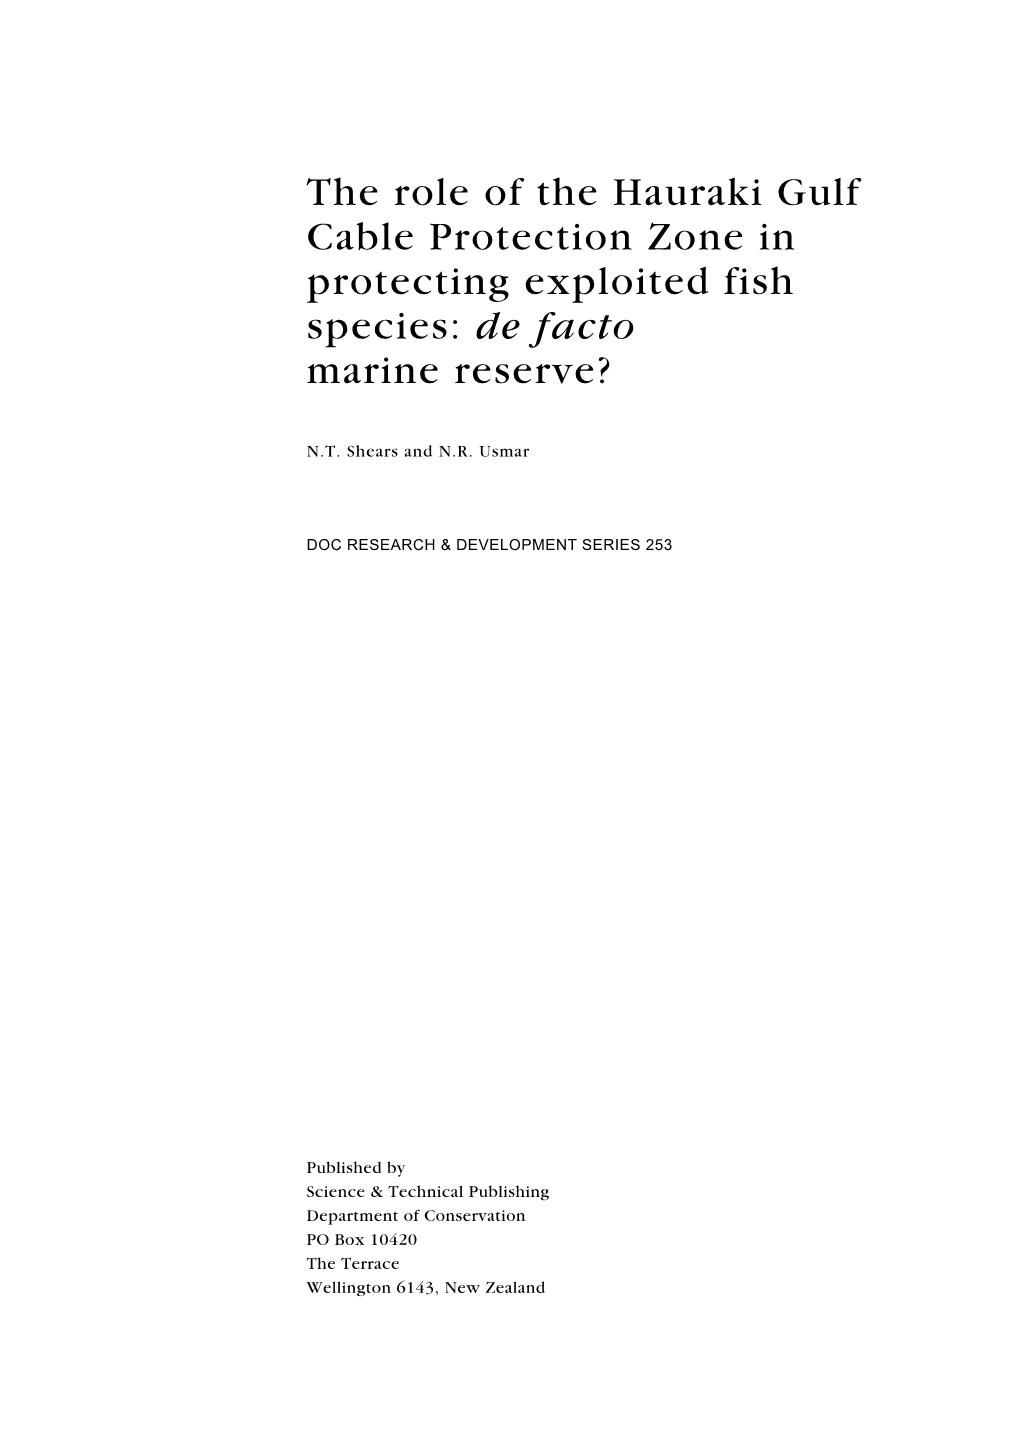 The Role of the Hauraki Gulf Cable Protection Zone in Protecting Exploited Fish Species: De Facto Marine Reserve?